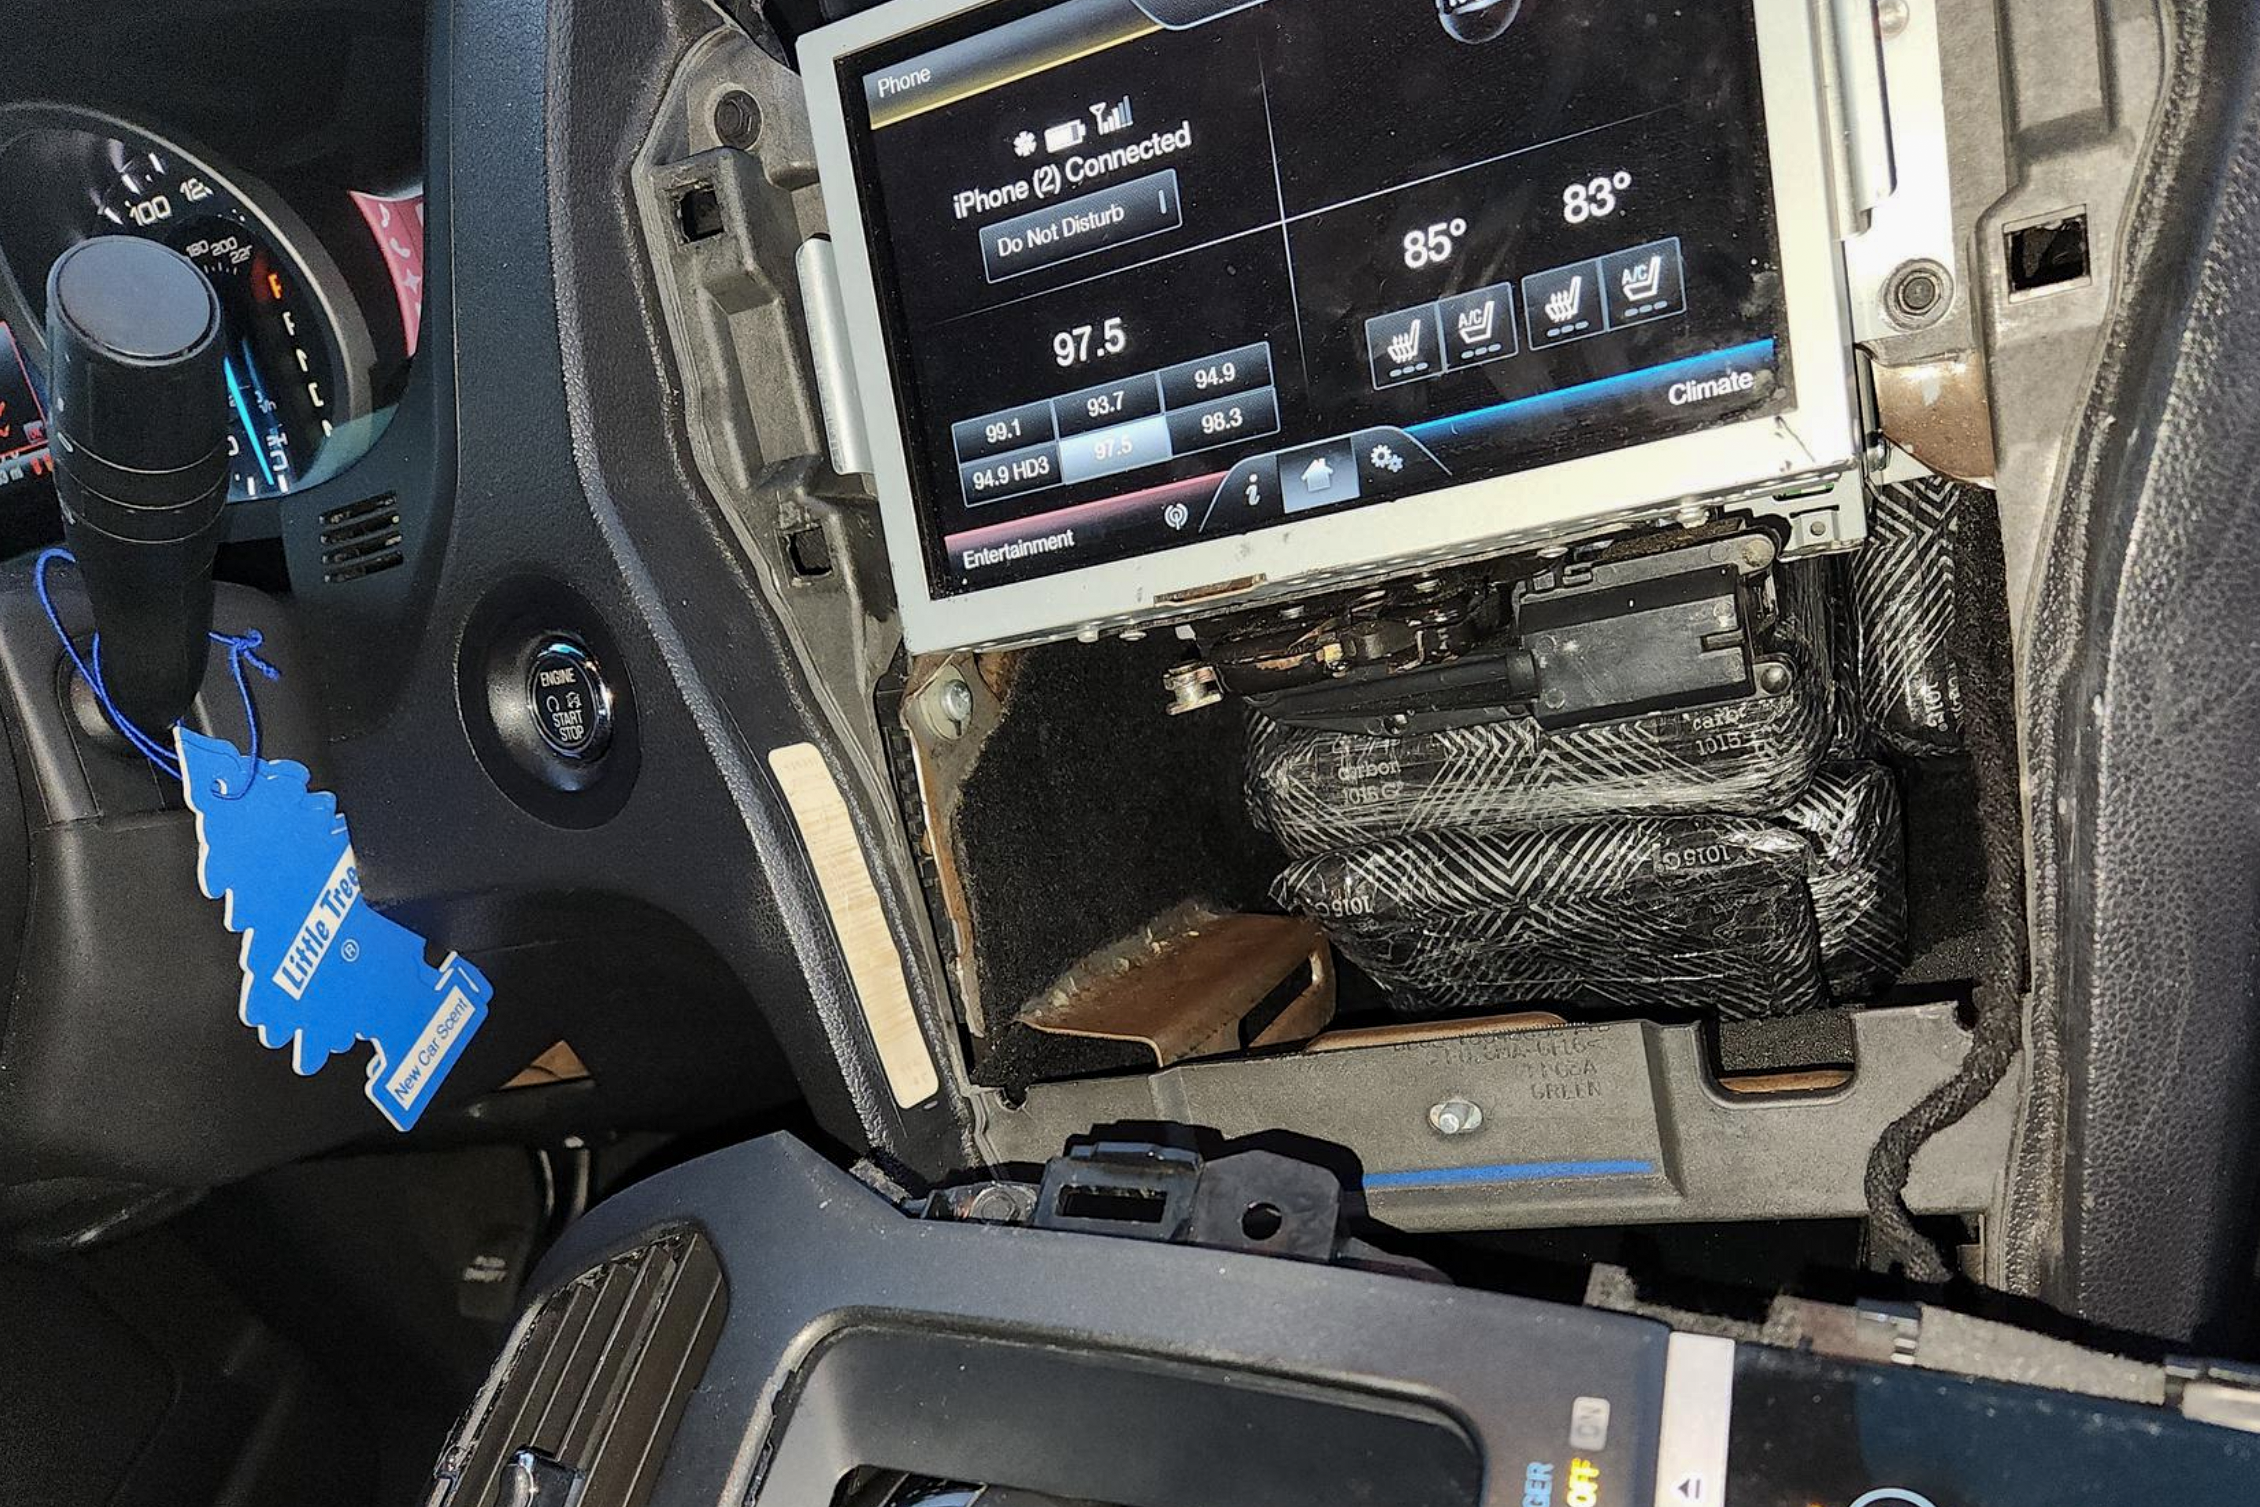 An aftermarket compartment in the dashboard of a car contains plastic wrapped packages 